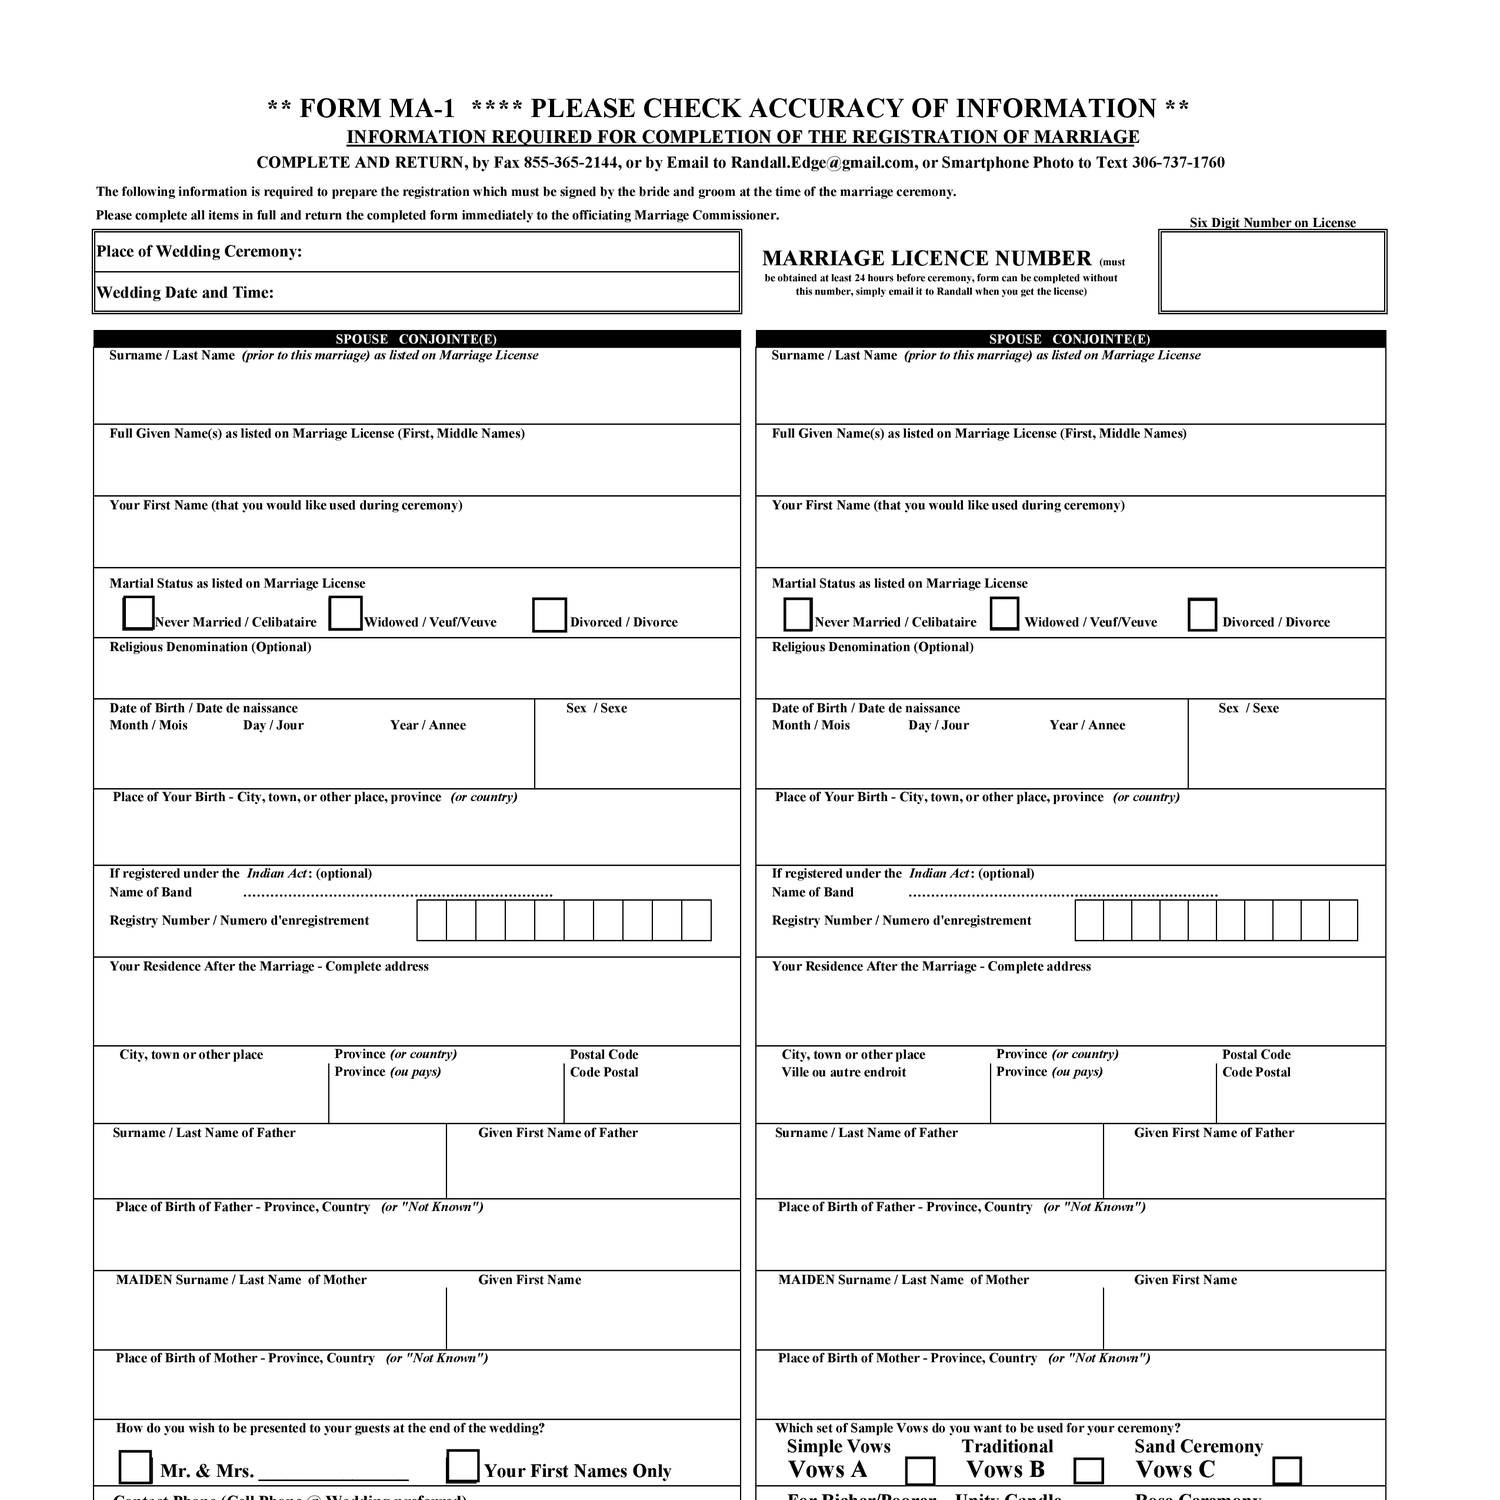 form-ma-1-information-for-legal-documents-signed-during-wedding